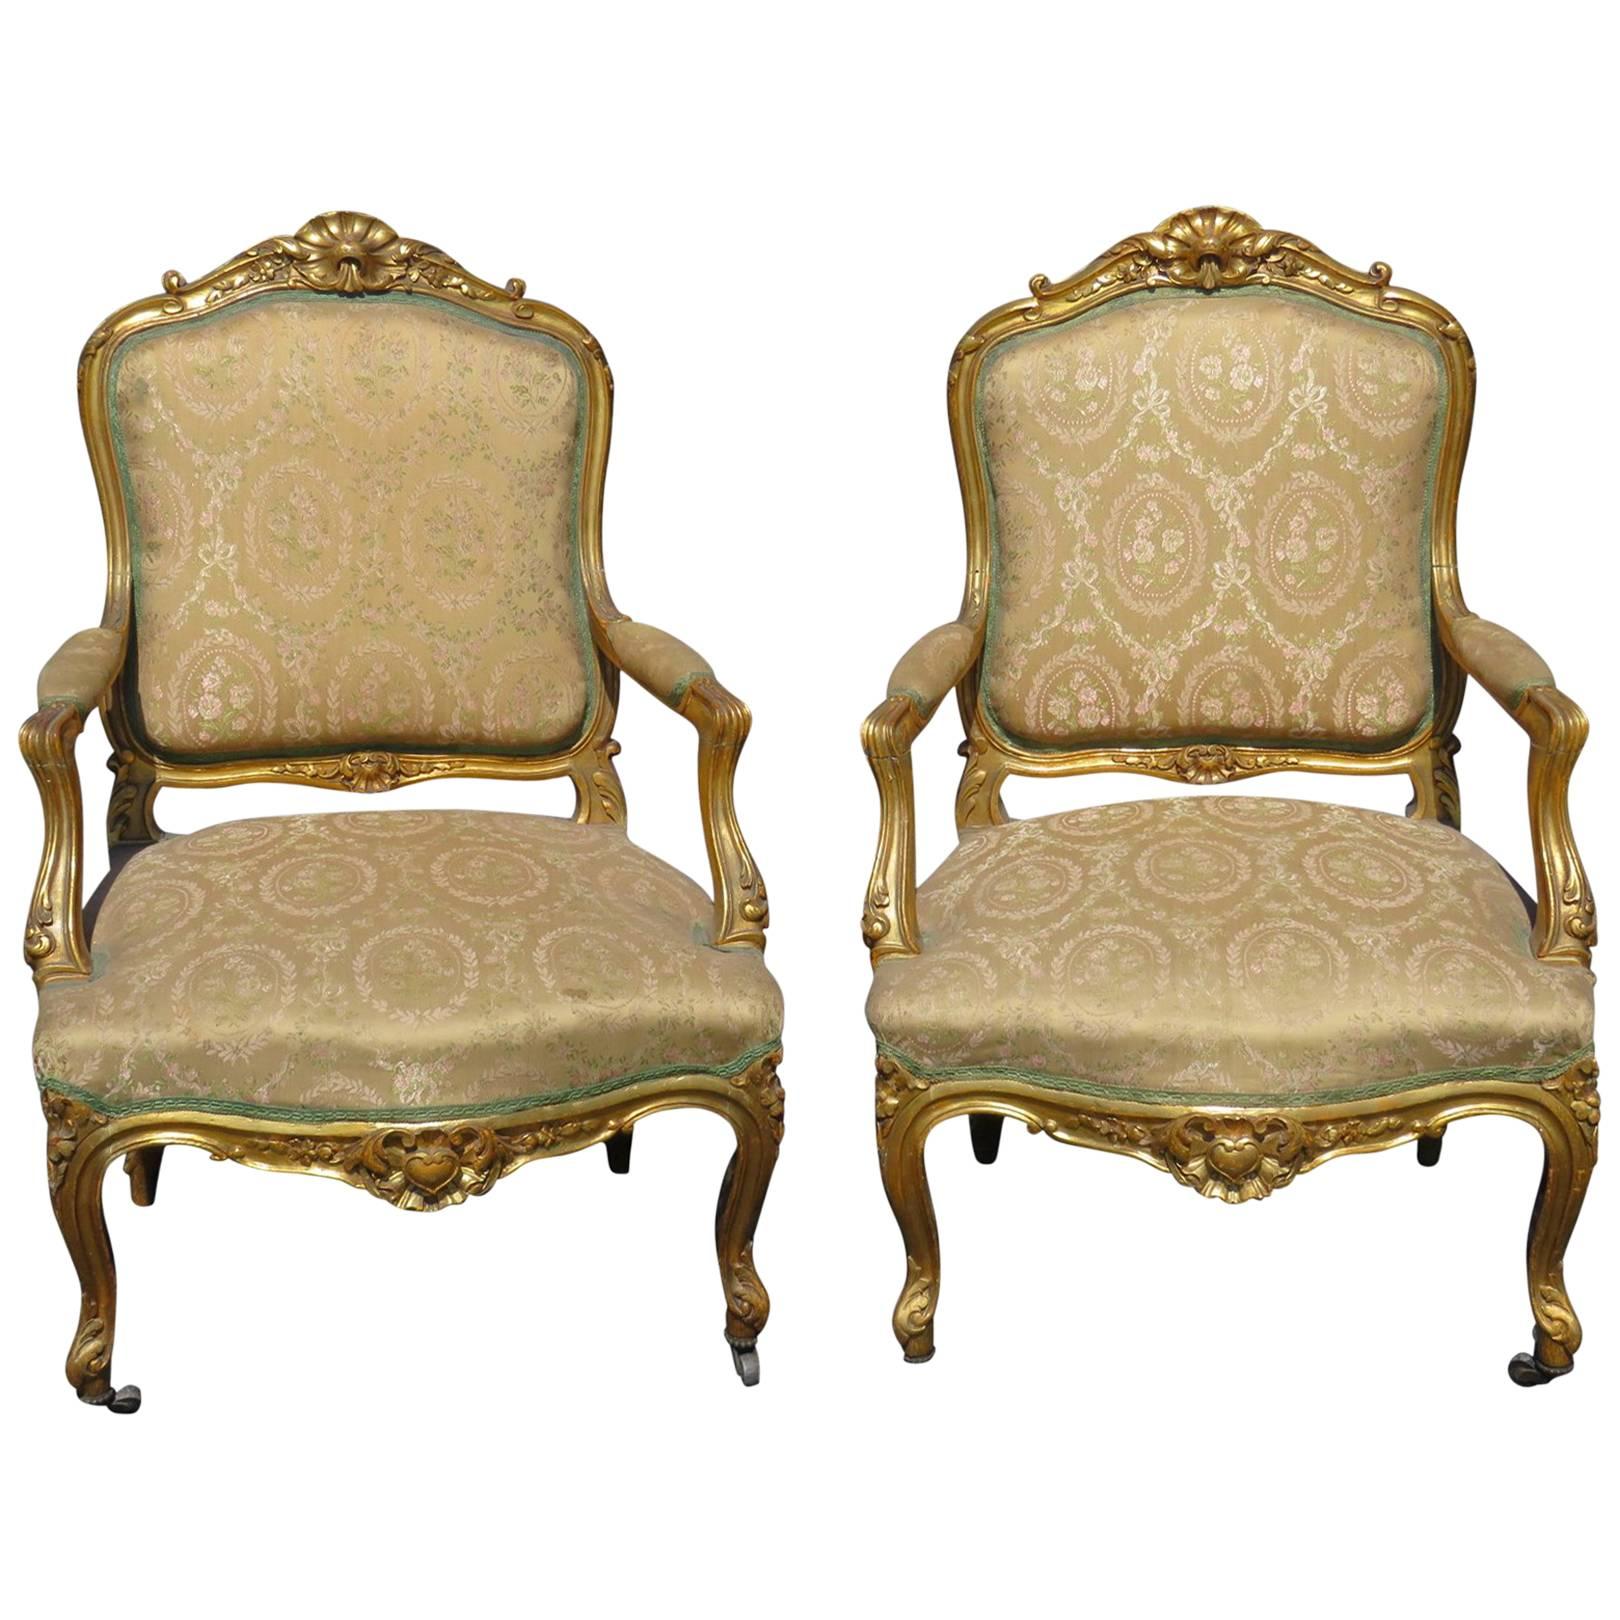 Pair of Louis XVI Style Gilt Carved Upholstered Fauteuils